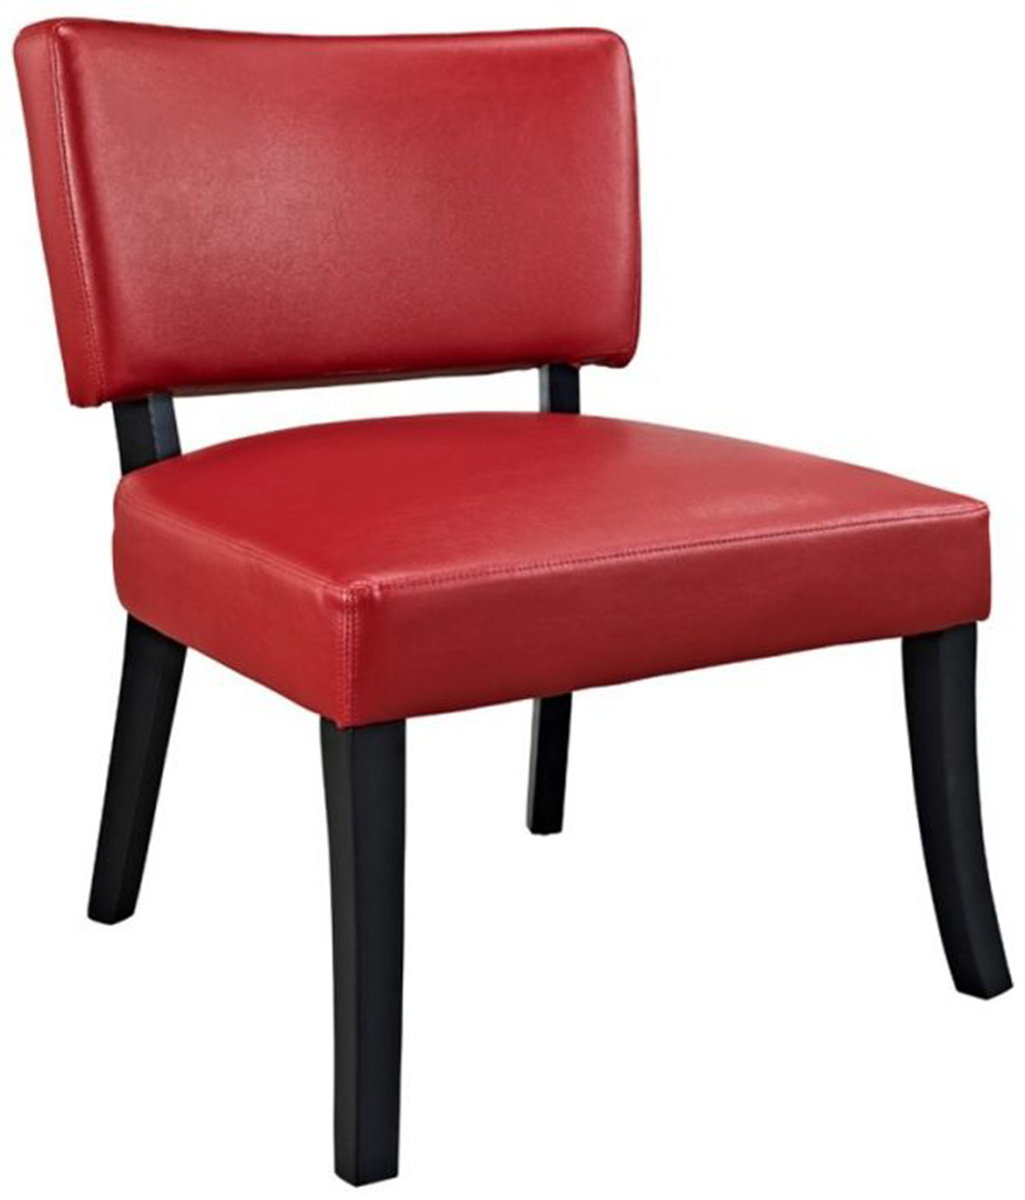 Powell 383-725 Faux Leather Accent Chair - Red/Black